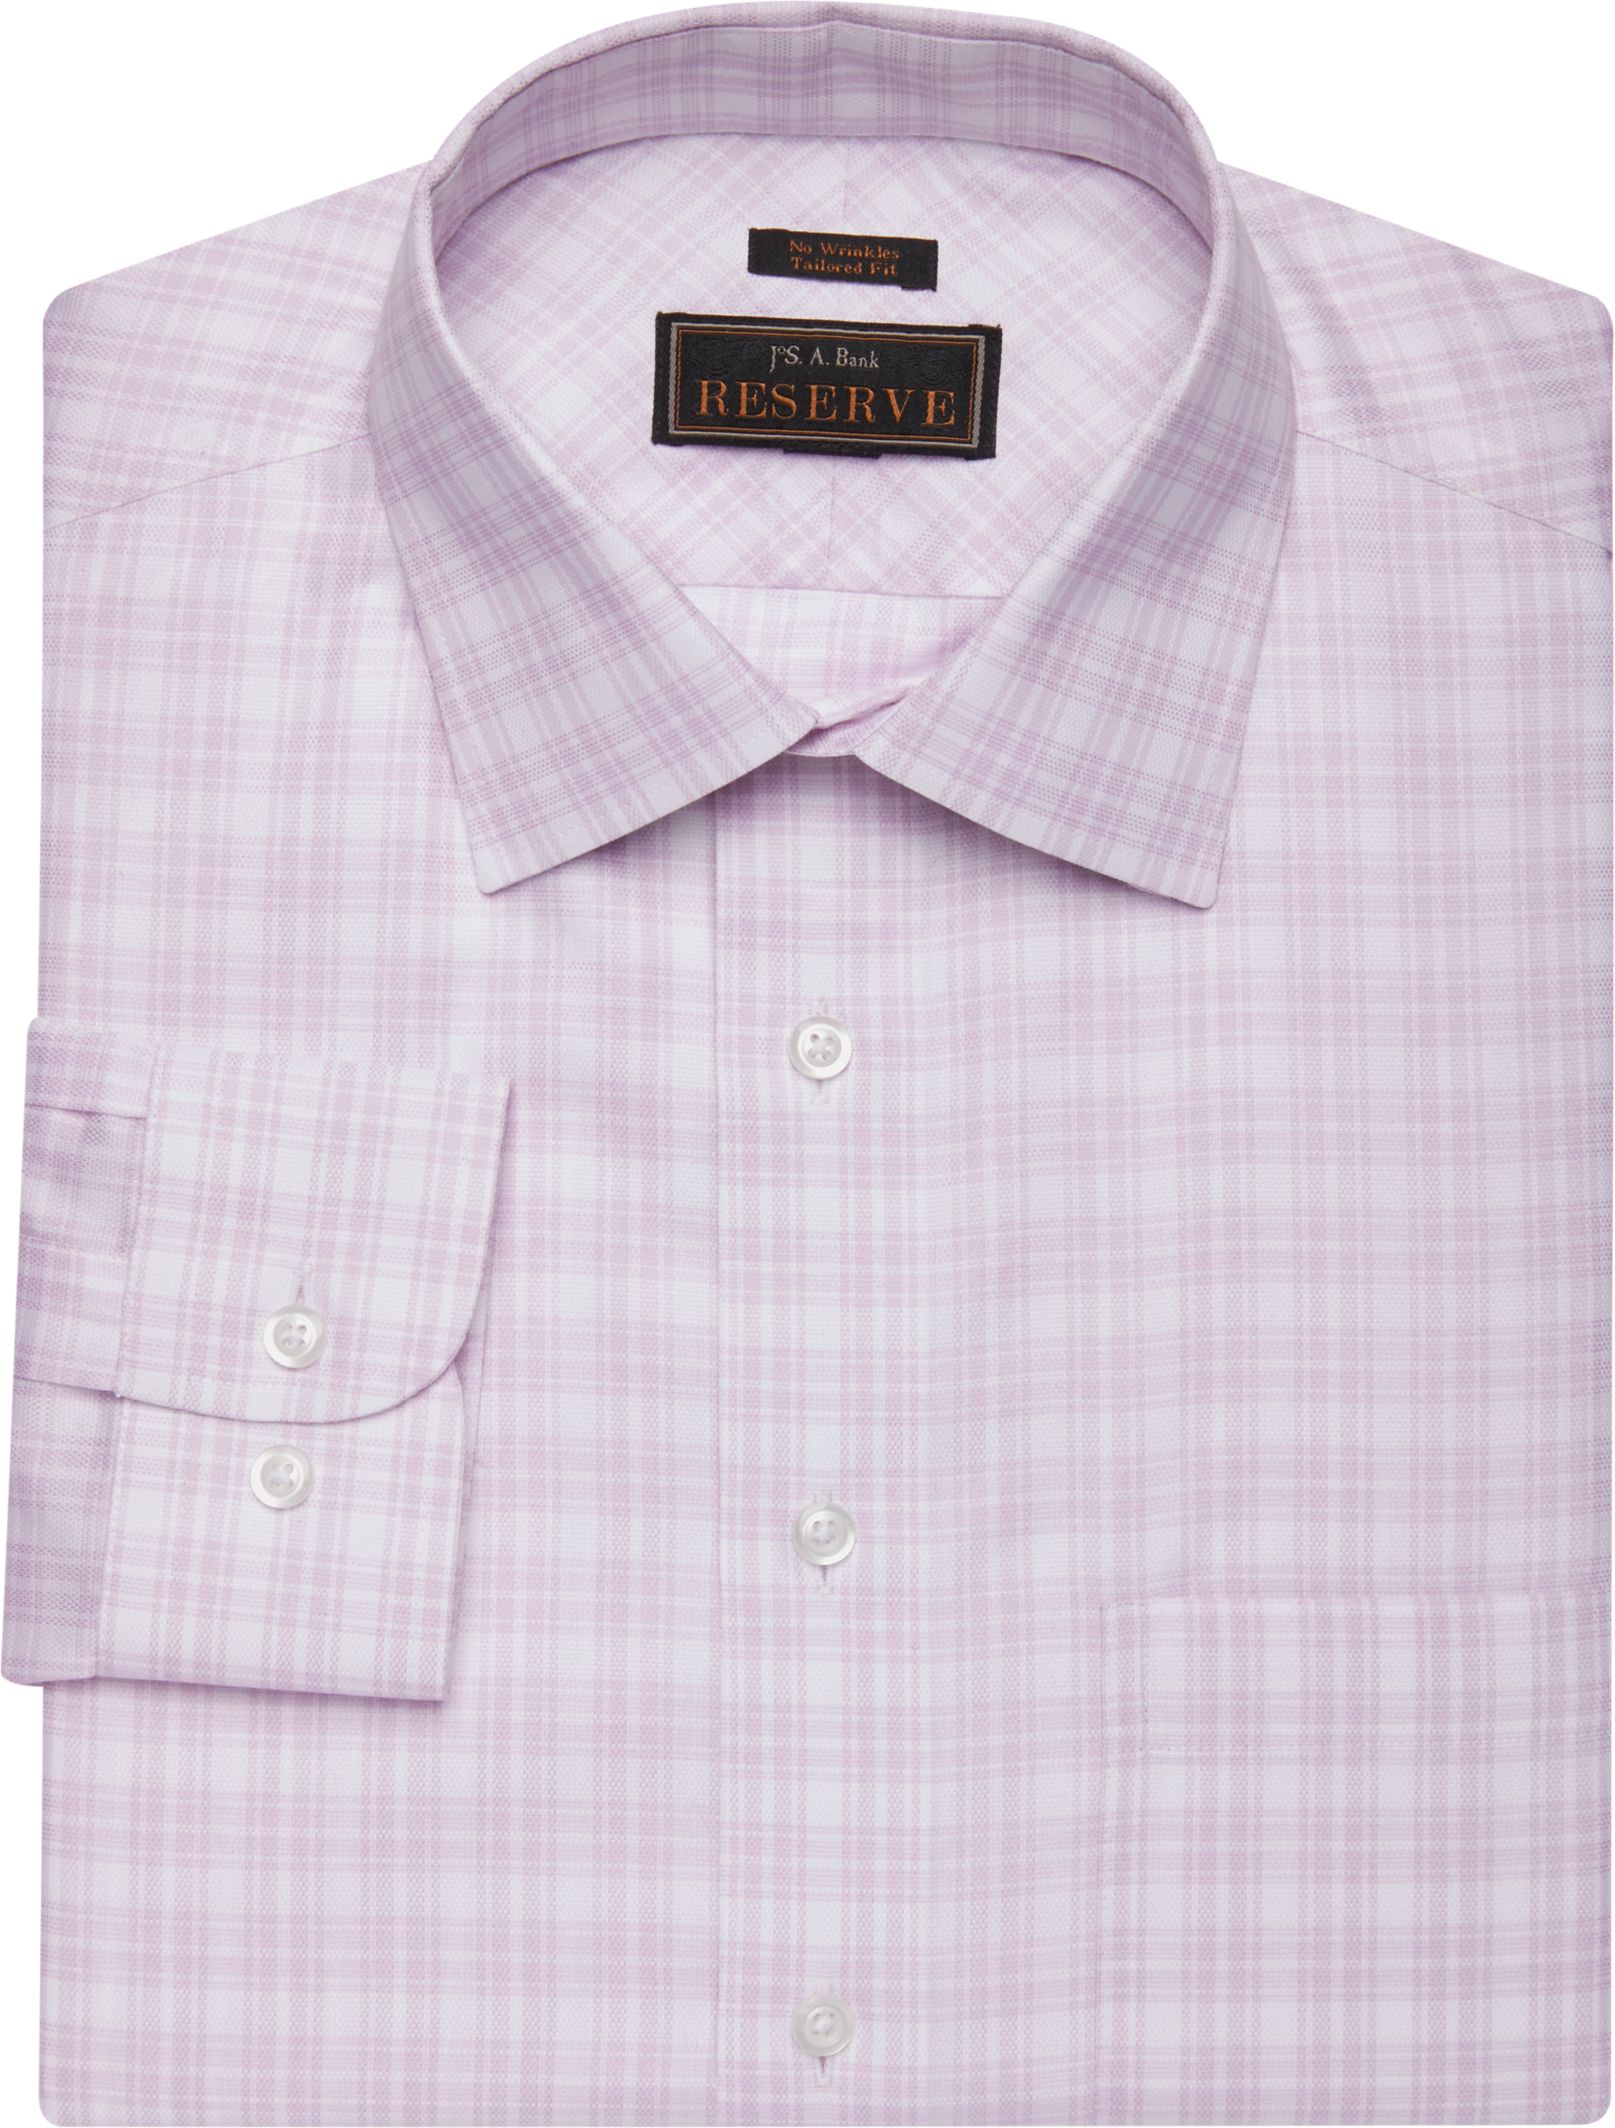 Reserve Collection Tailored Fit Spread Collar Plaid Dress Shirt - Men's ...